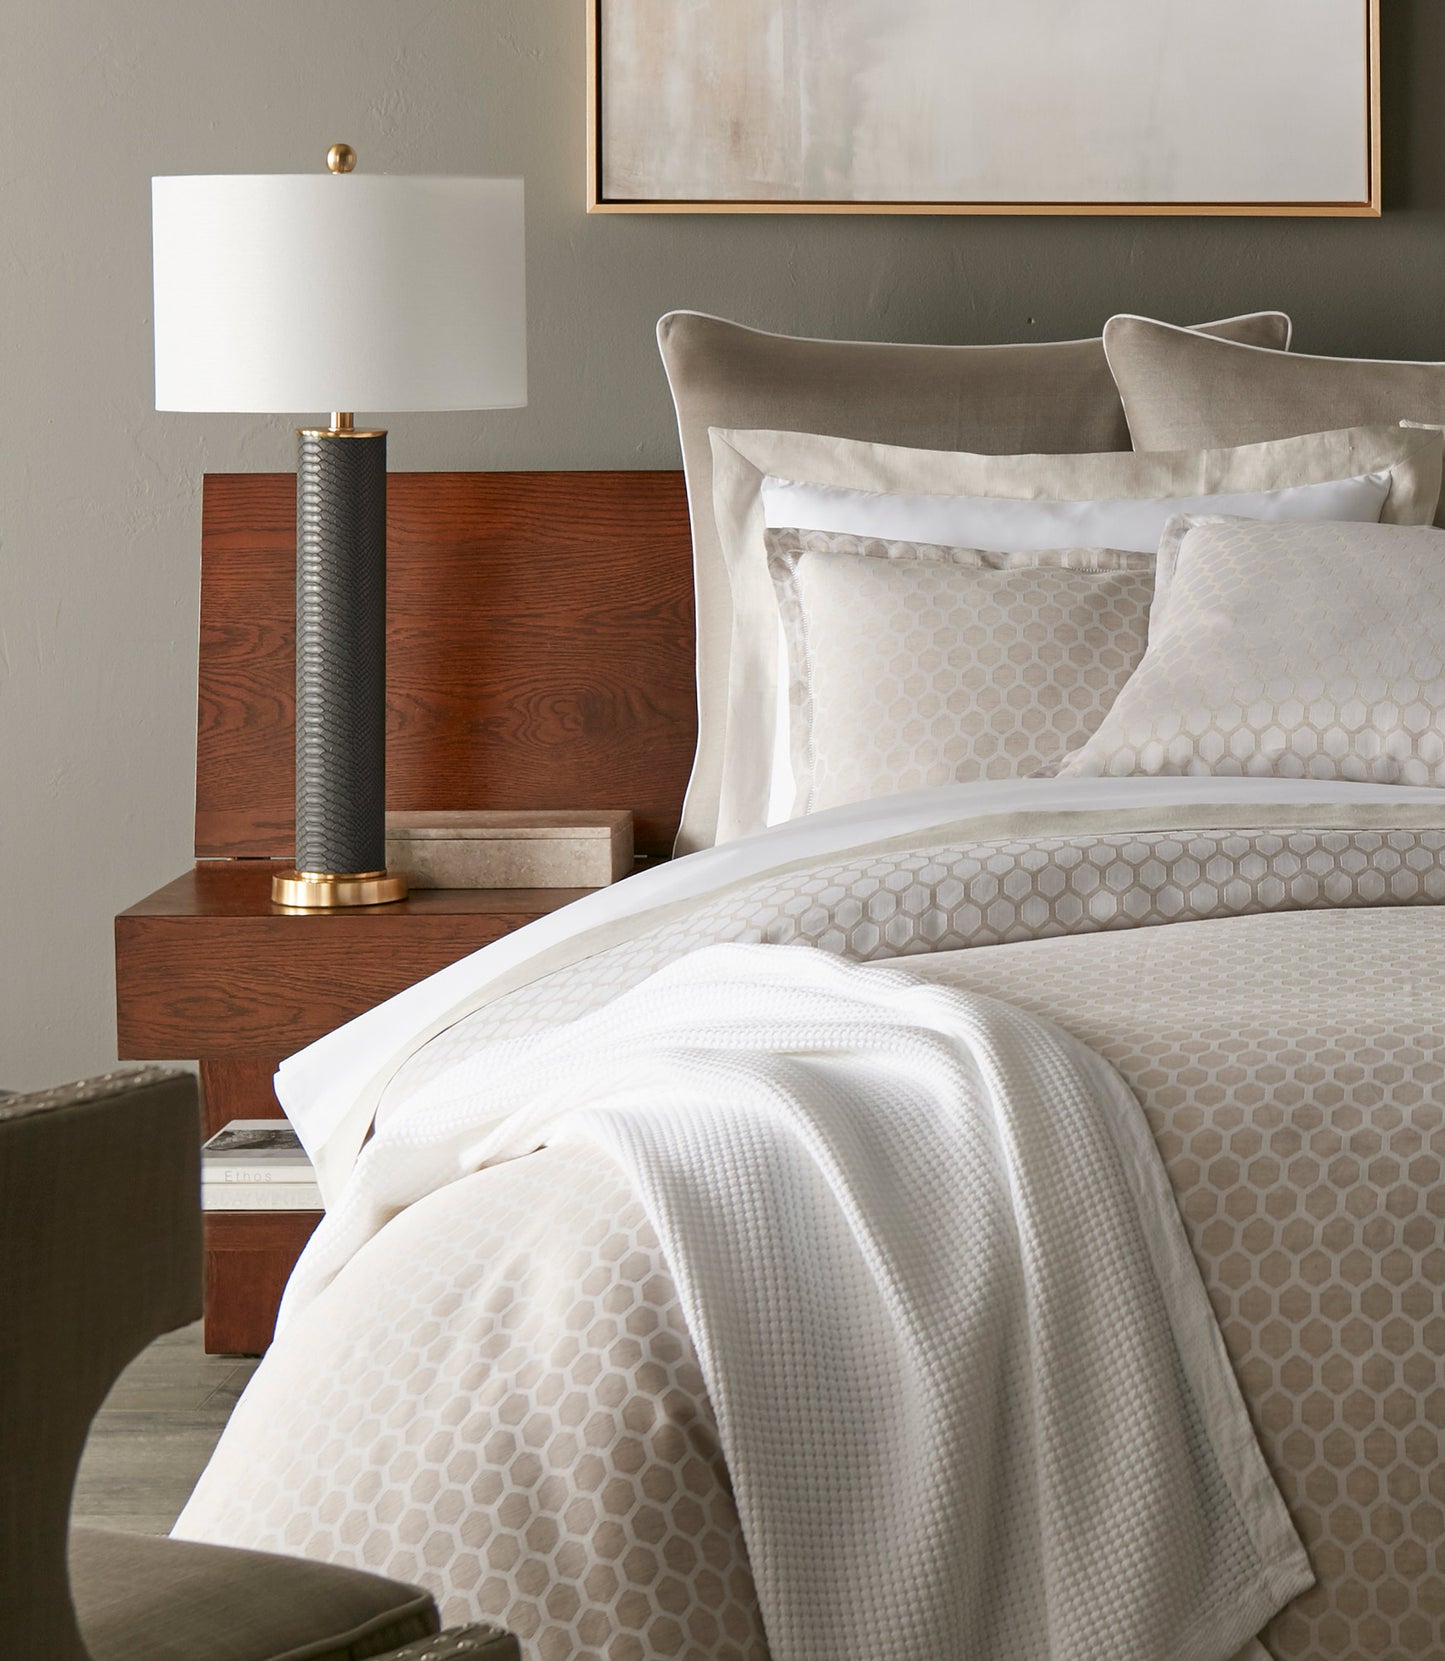 Honeycomb Reversible Duvet Cover and Shams on Bed in Hotel Room Linen